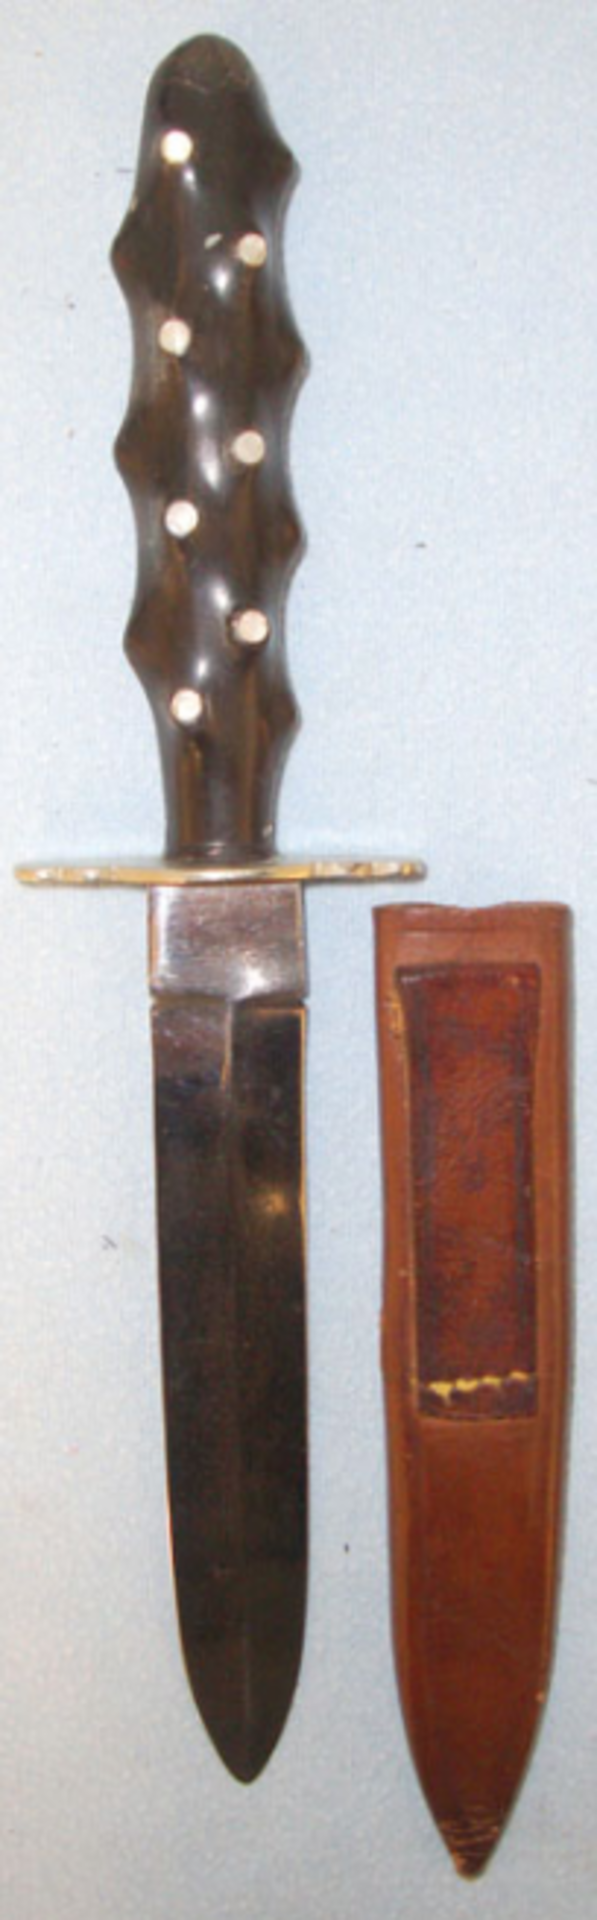 Late Victorian Masonic Knife With Ebony Handle Inlaid With Mother Of Pearl Studs - Image 3 of 3